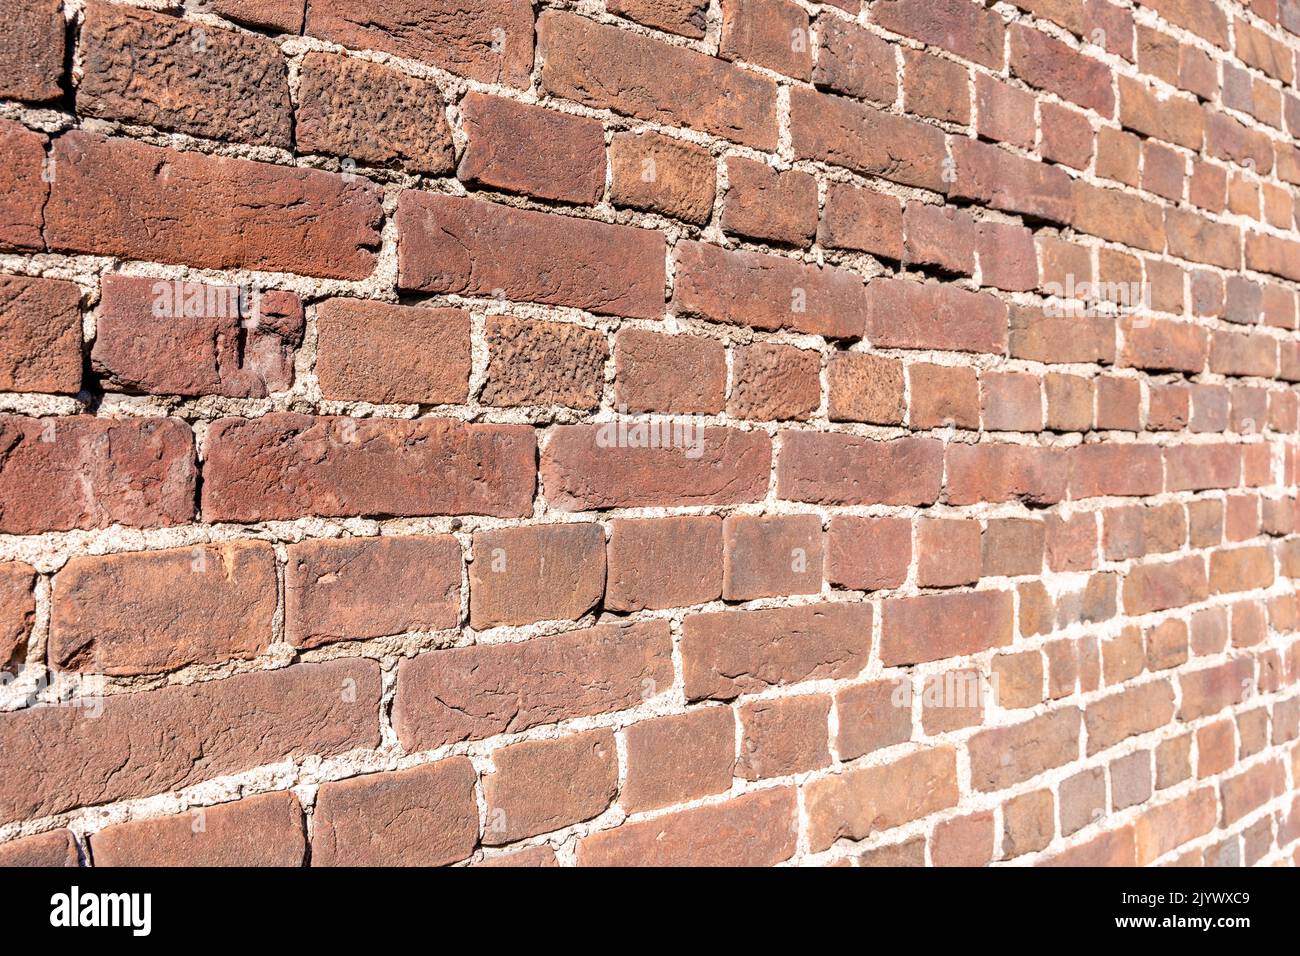 The texture background brick wall made of old red brick Stock Photo